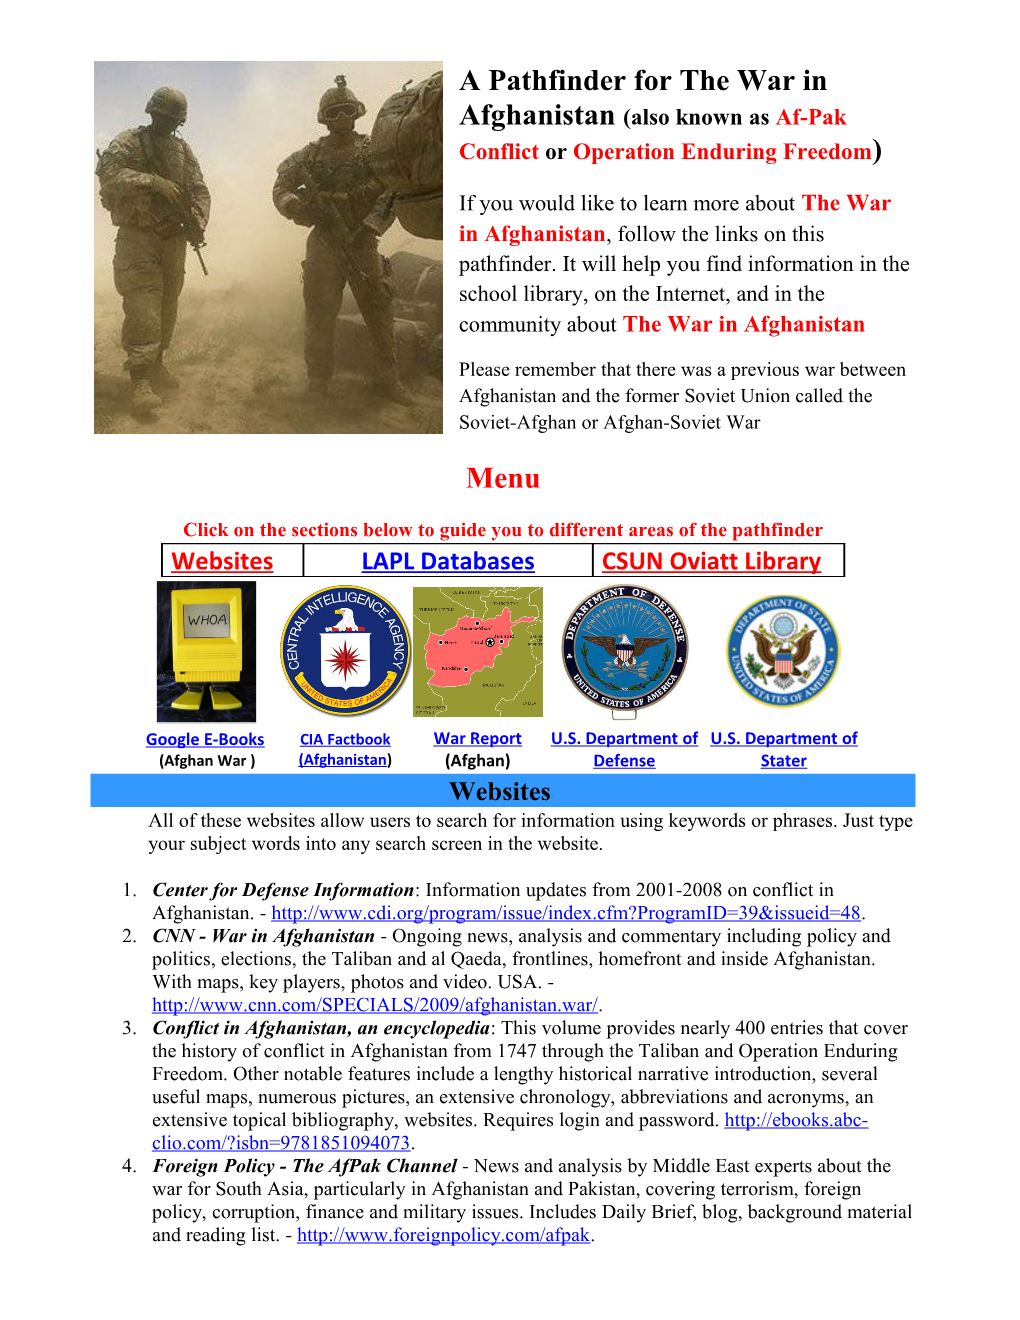 Center for Defense Information : Information Updates from 2001-2008 on Conflict in Afghanistan